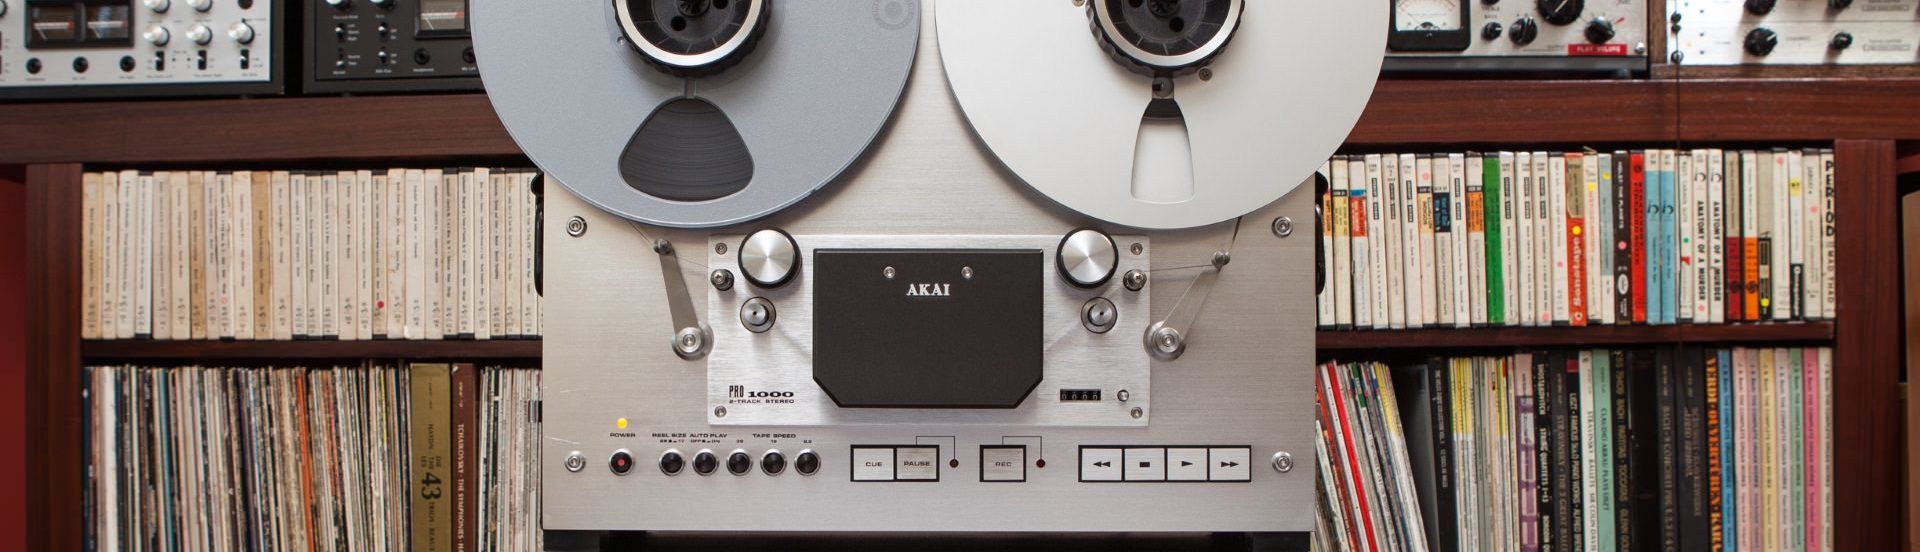 Reel to Reel History of Tape Recording